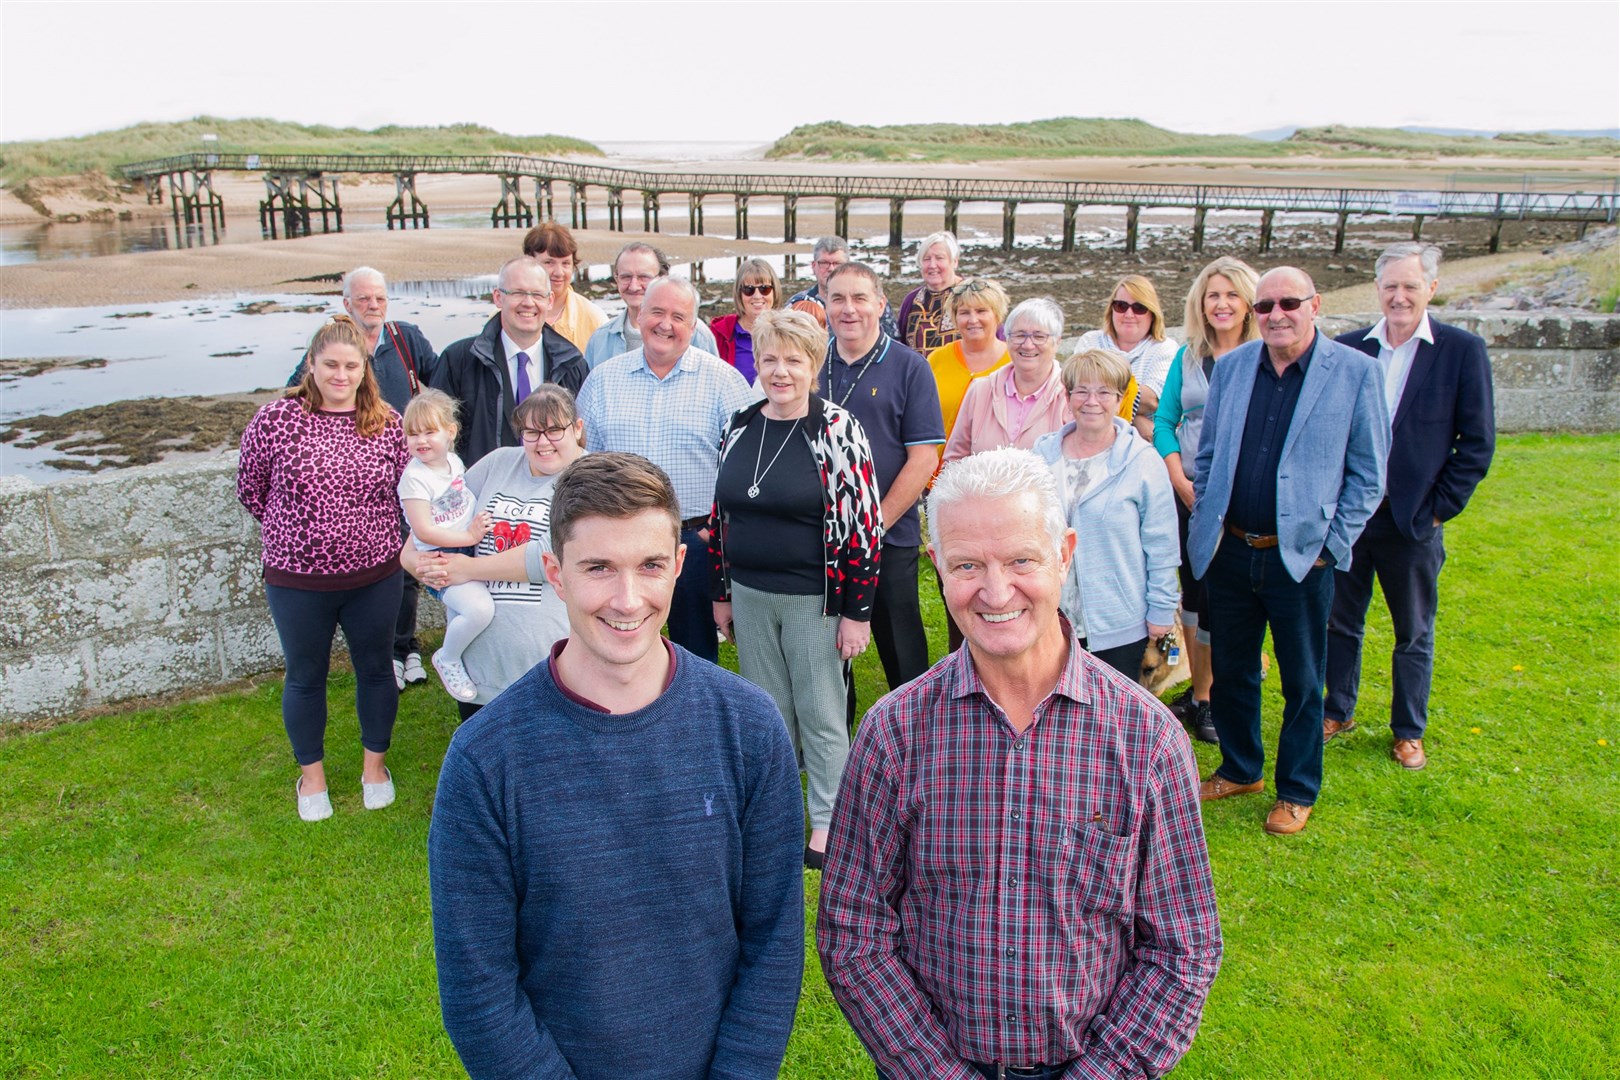 Members of the Lossiemouth community, including (front from left) Community Development Trust's chairman Alan Macdonald and development trust officer Huw Williams, welcome news that the Scottish Government will cover the full cost of repairs or a replacement for the Lossiemouth East Beach bridge. Picture: Daniel Forsyth. Image No.044677.